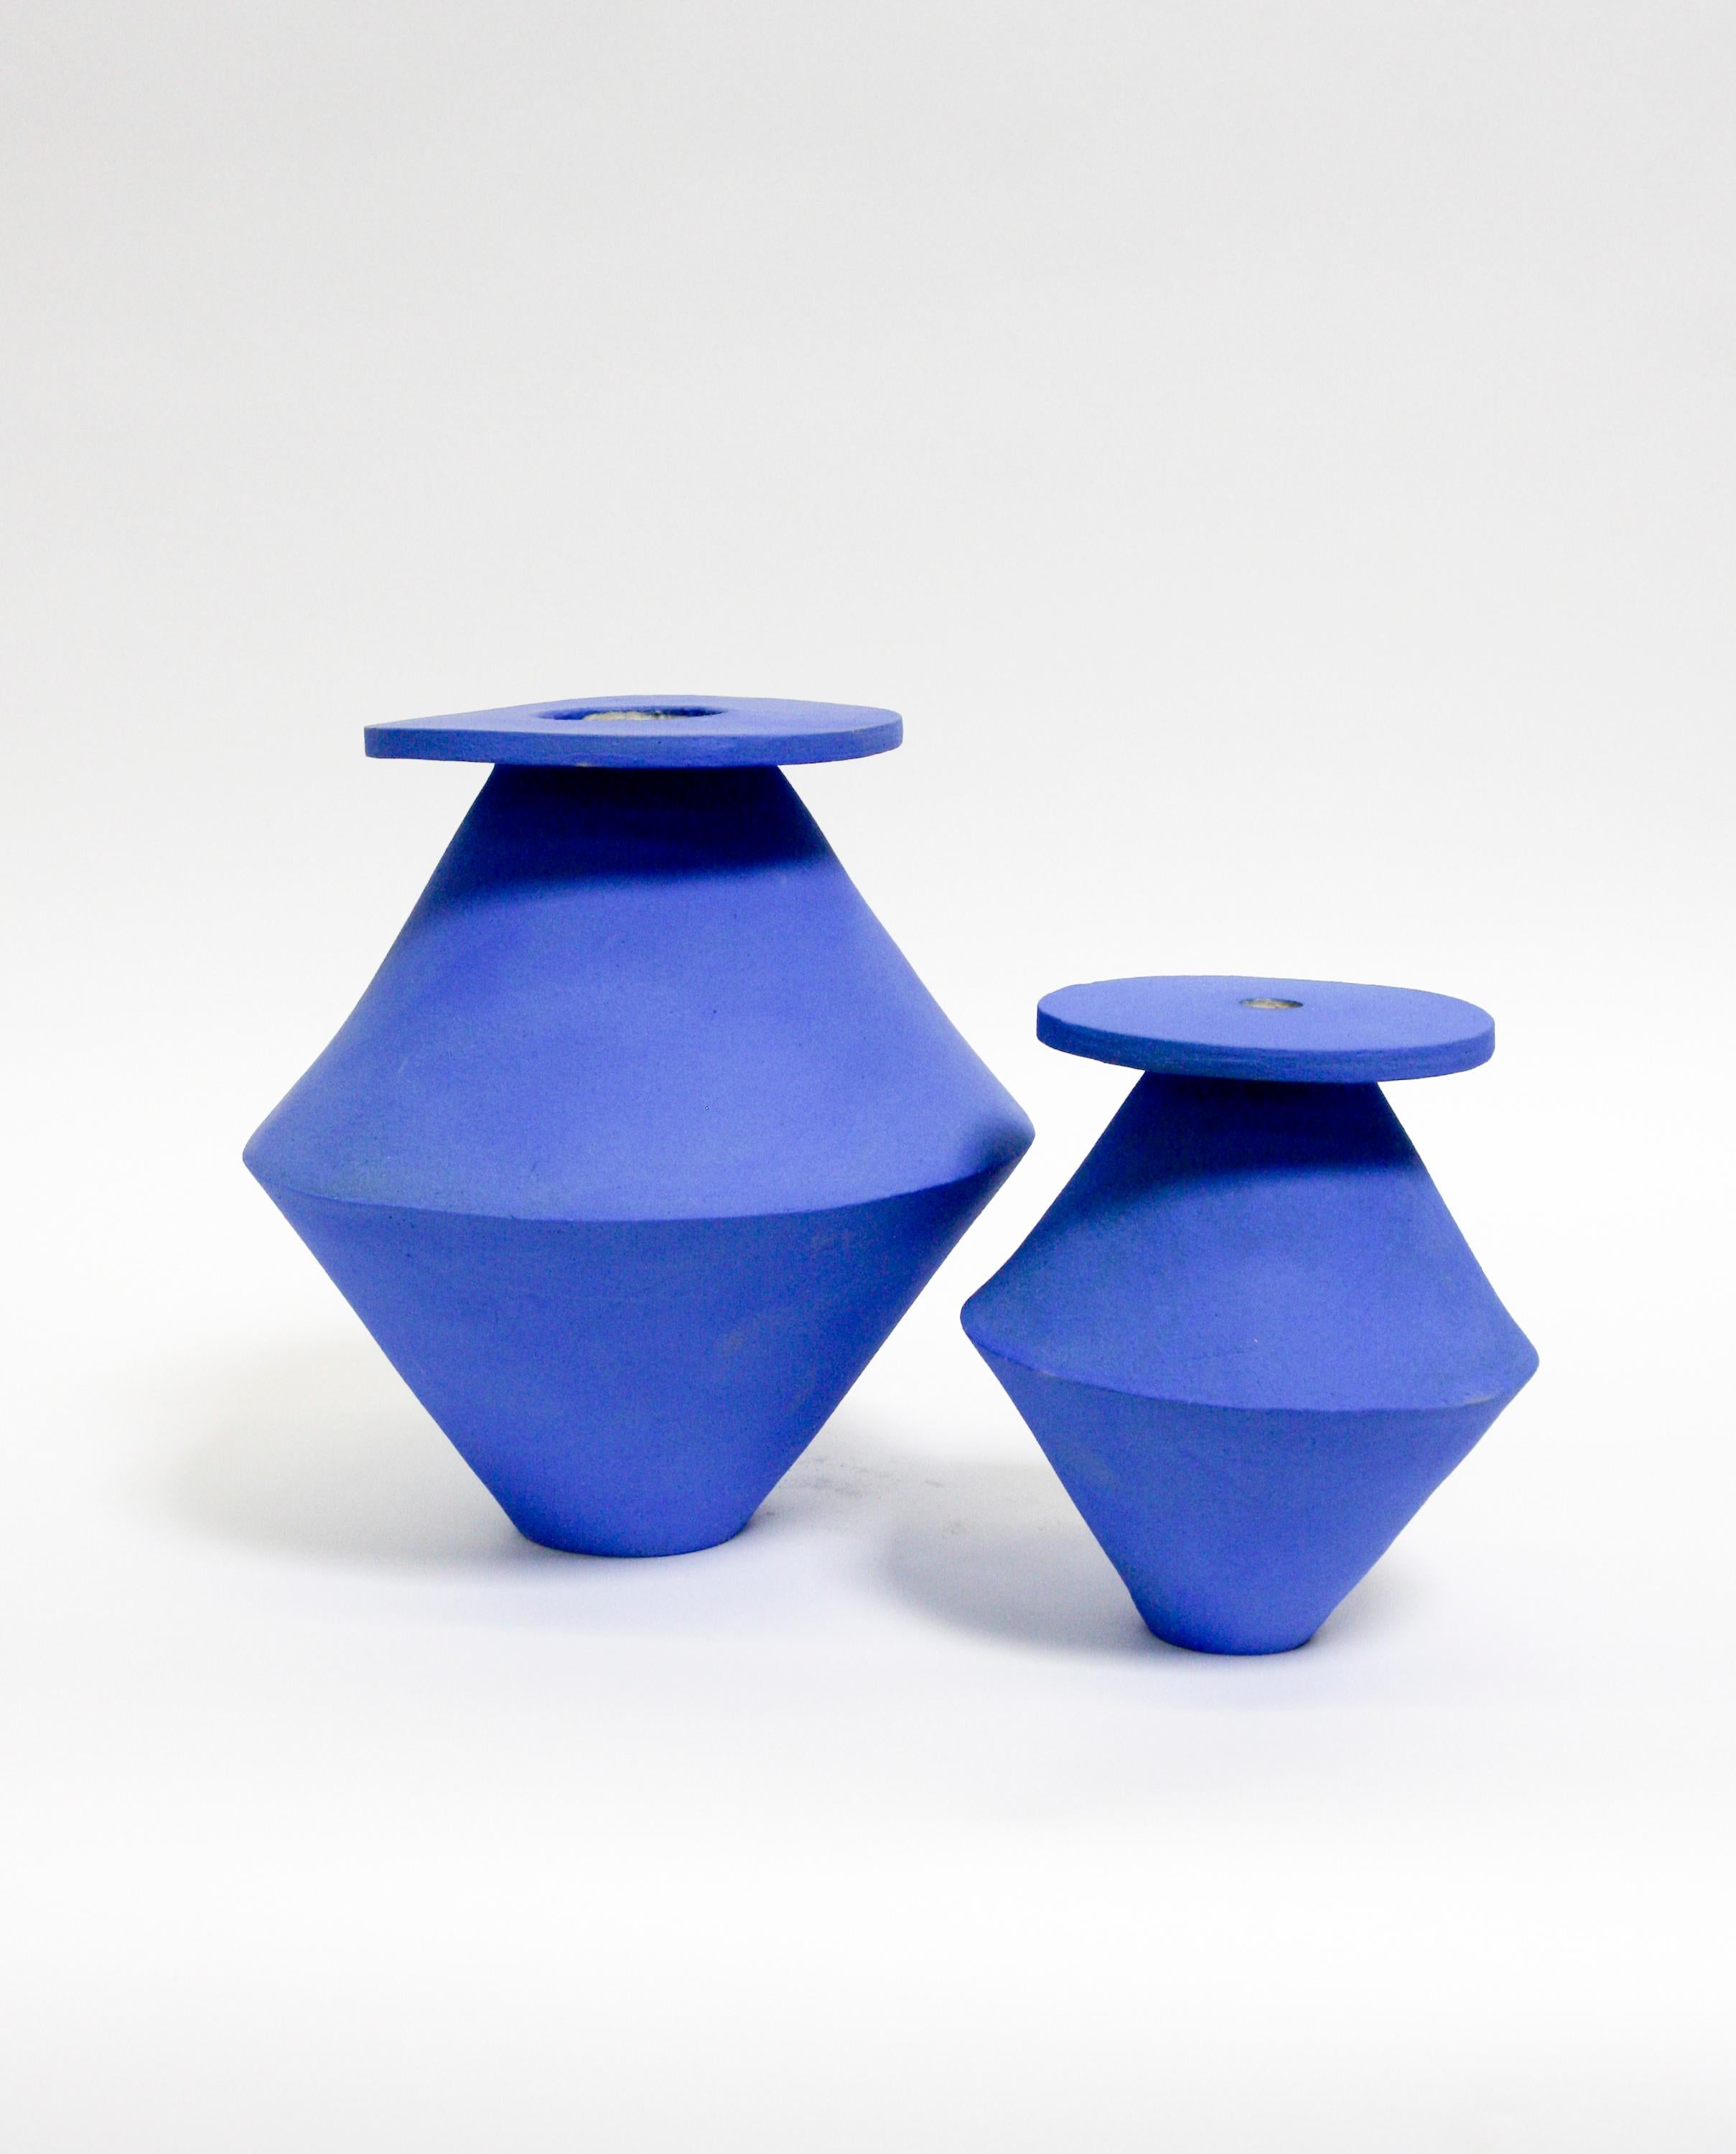 Jumbo Klein blue diamond vase, stoneware and glaze. Measures: 10 x 12?
Unlimited edition, individual vases are unique in size, glaze, and shape.
Well made in Los Angeles.

Made to order unless in stock, please allow 4 – 6 weeks for delivery